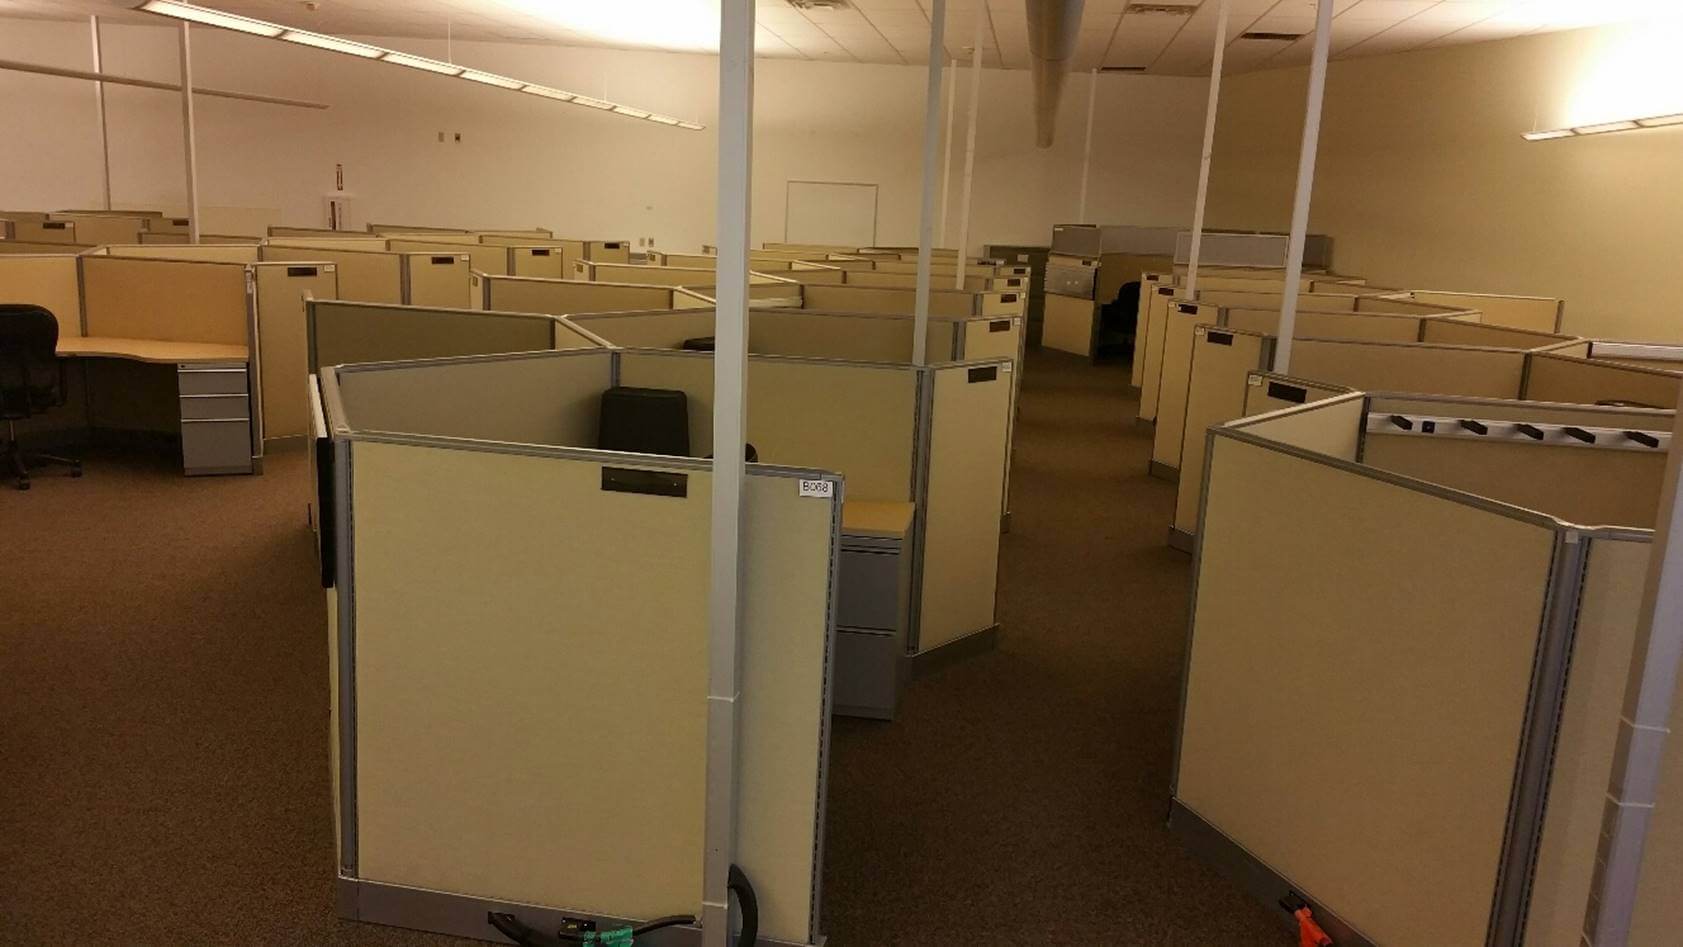 Used cubicles with Medium panels from Knoll - this workstaion are used in honeycomb layout